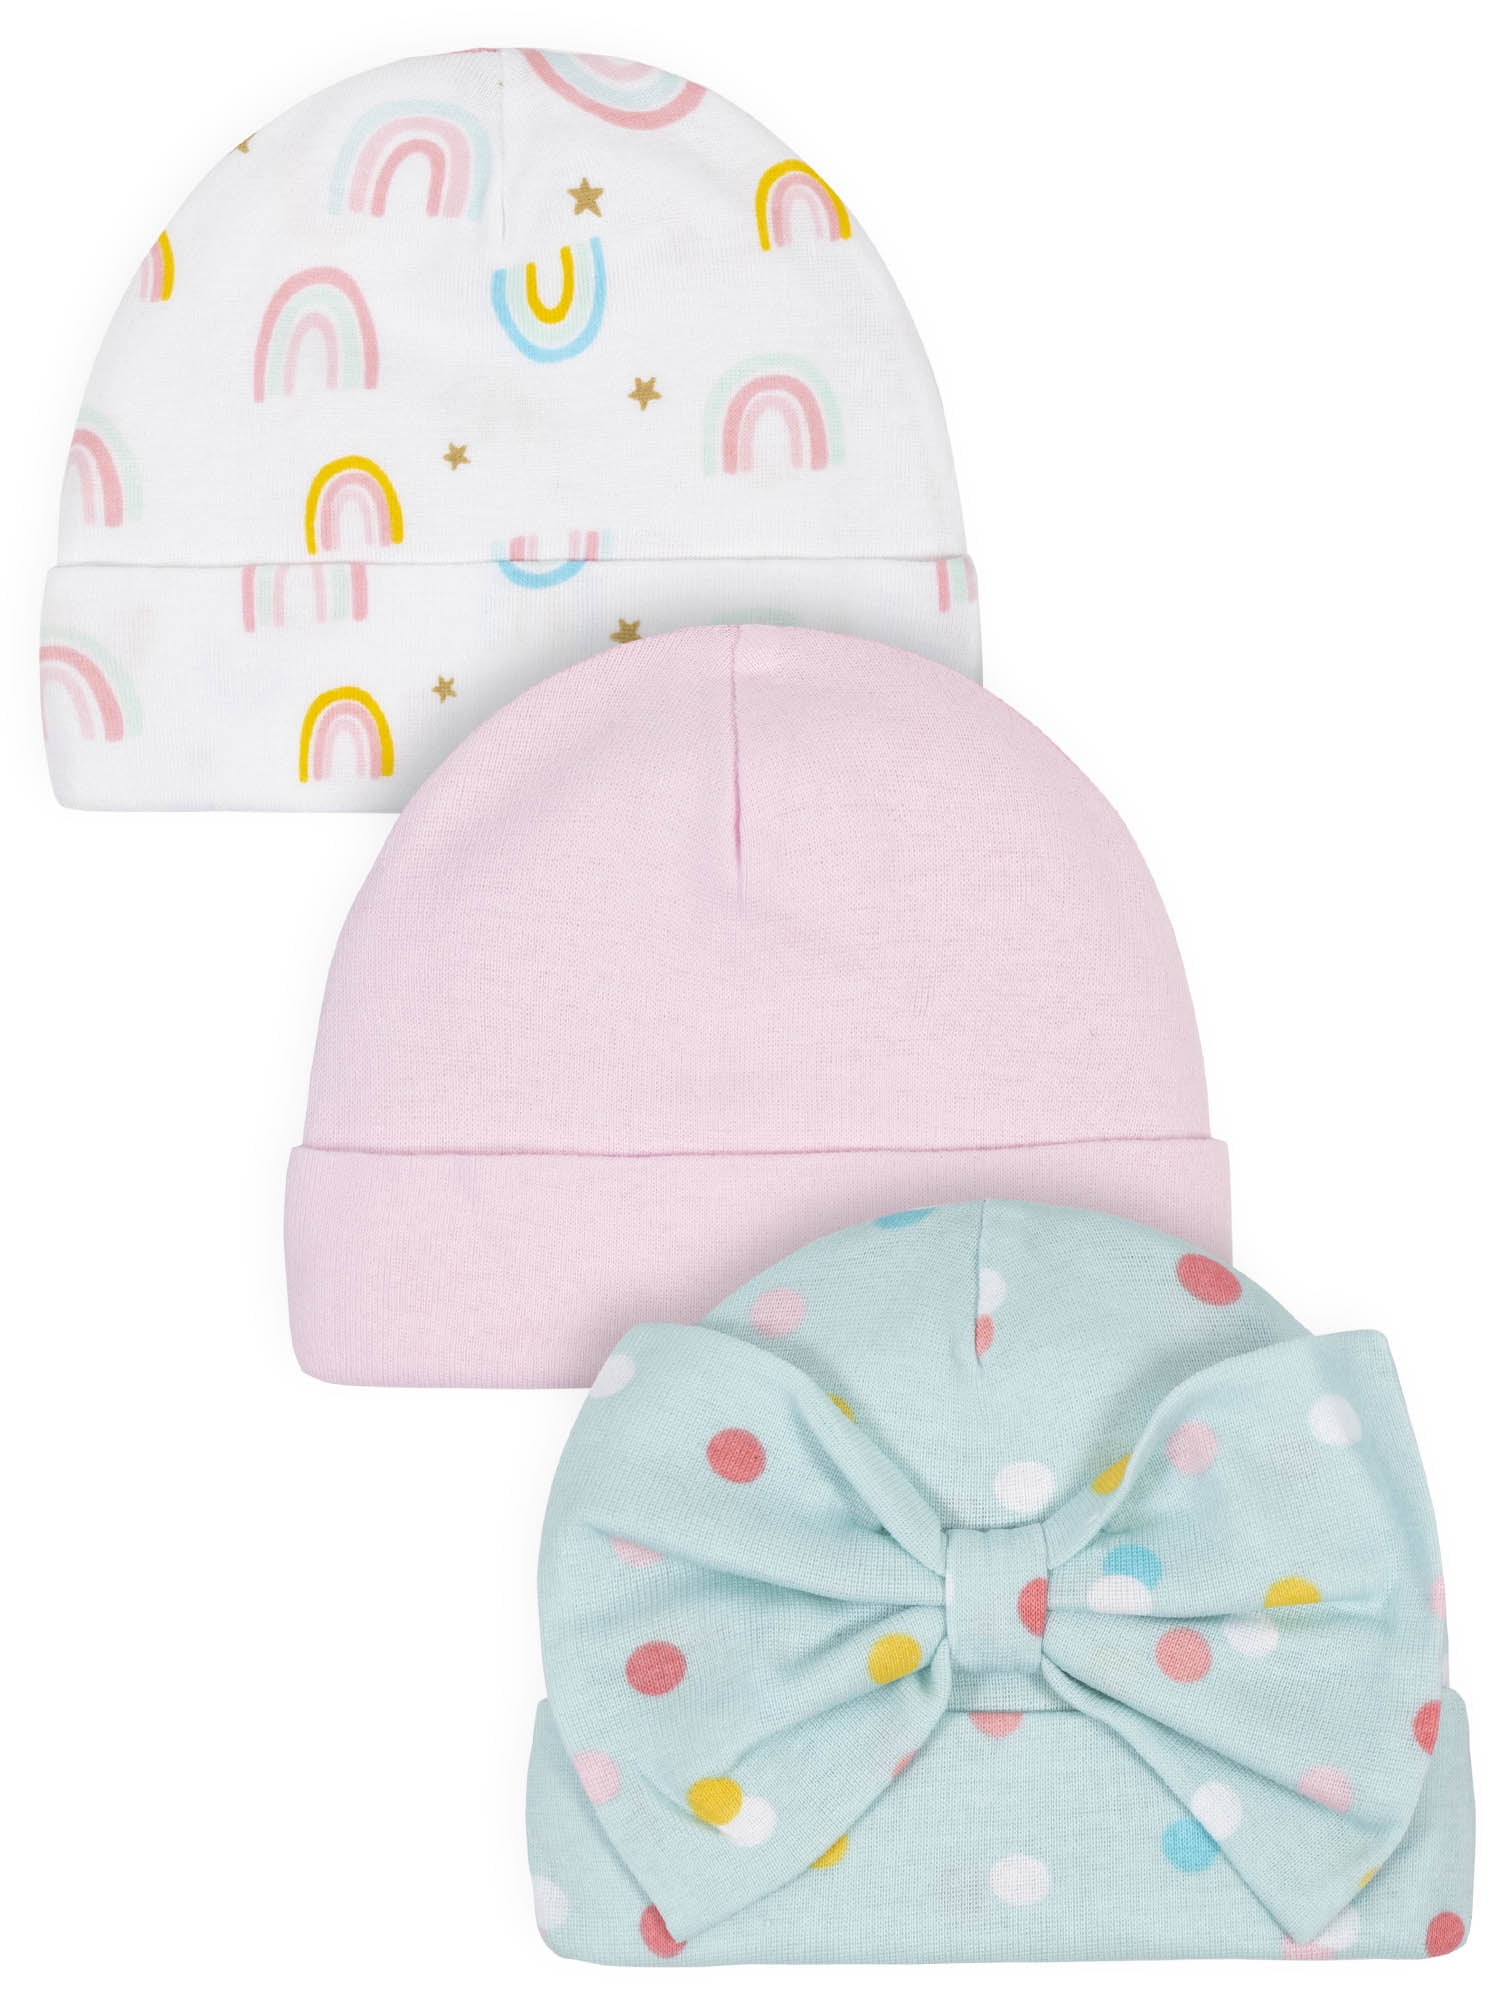 Pink GERBER NEWBORN BABY GIRL'S 3-Pack Cotton Caps Hats NWT FLOWERS 